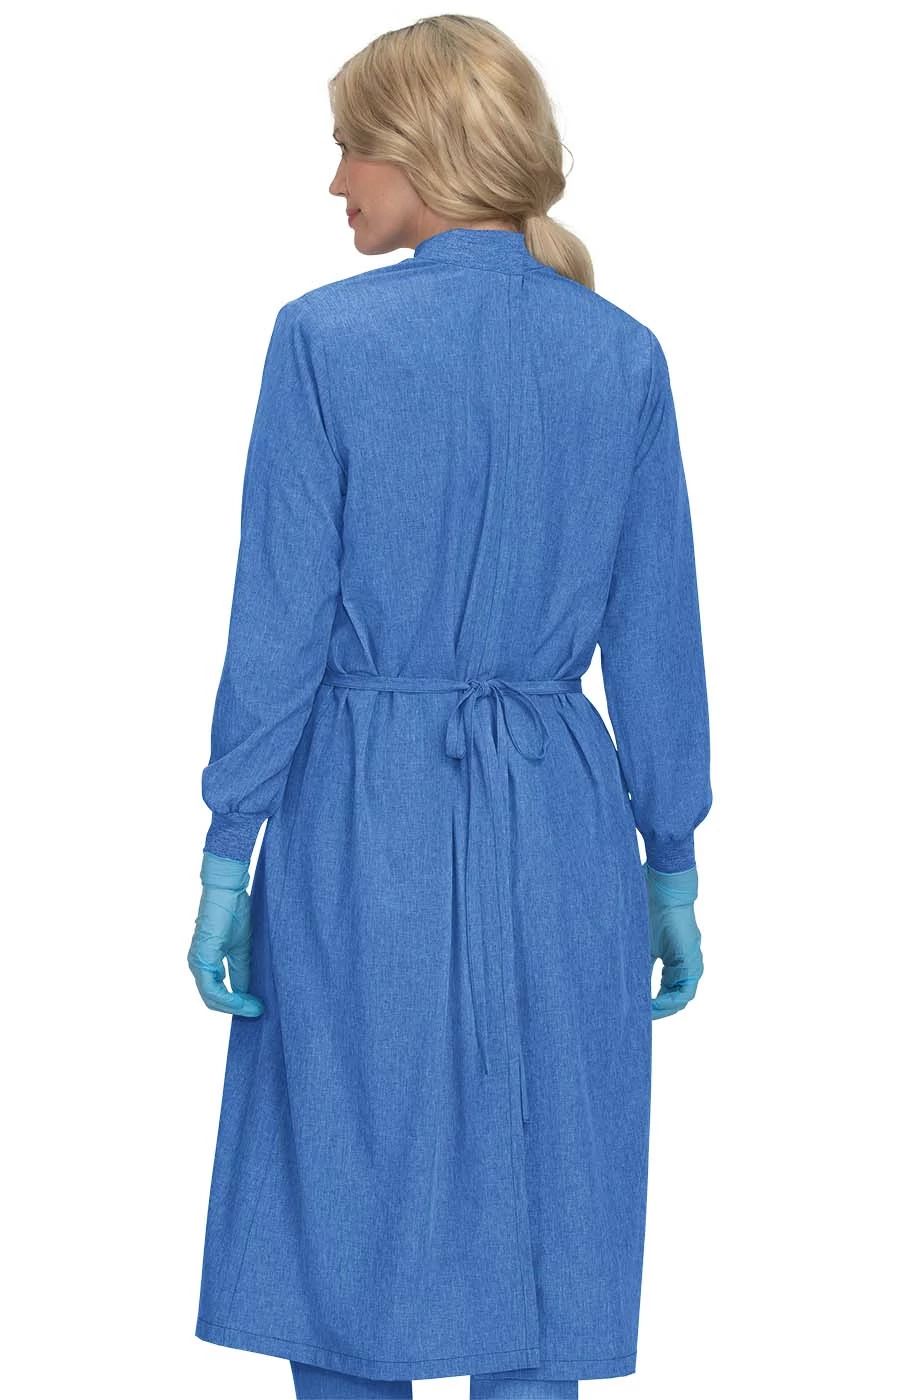 clinical-cover-gown-heather-galaxy